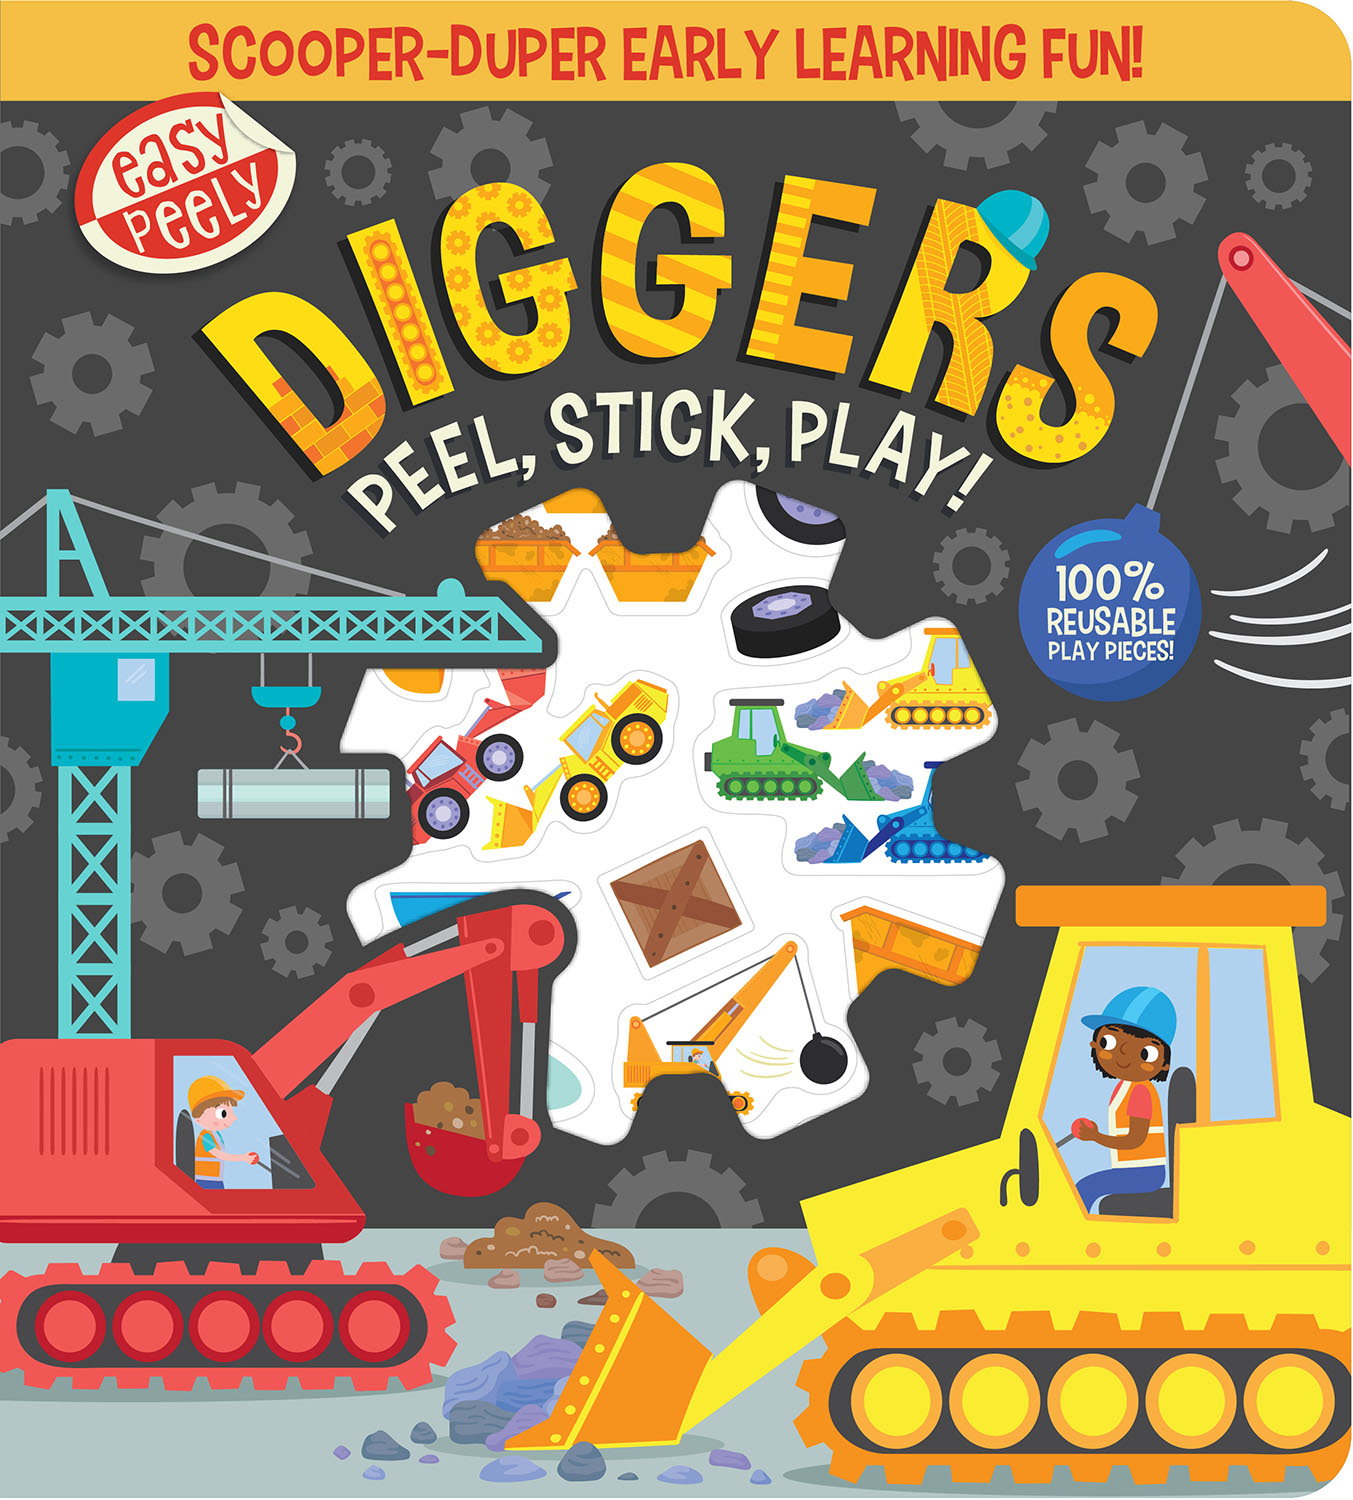 EASY PEELY DIGGERS - PEEL, STICK, PLAY!